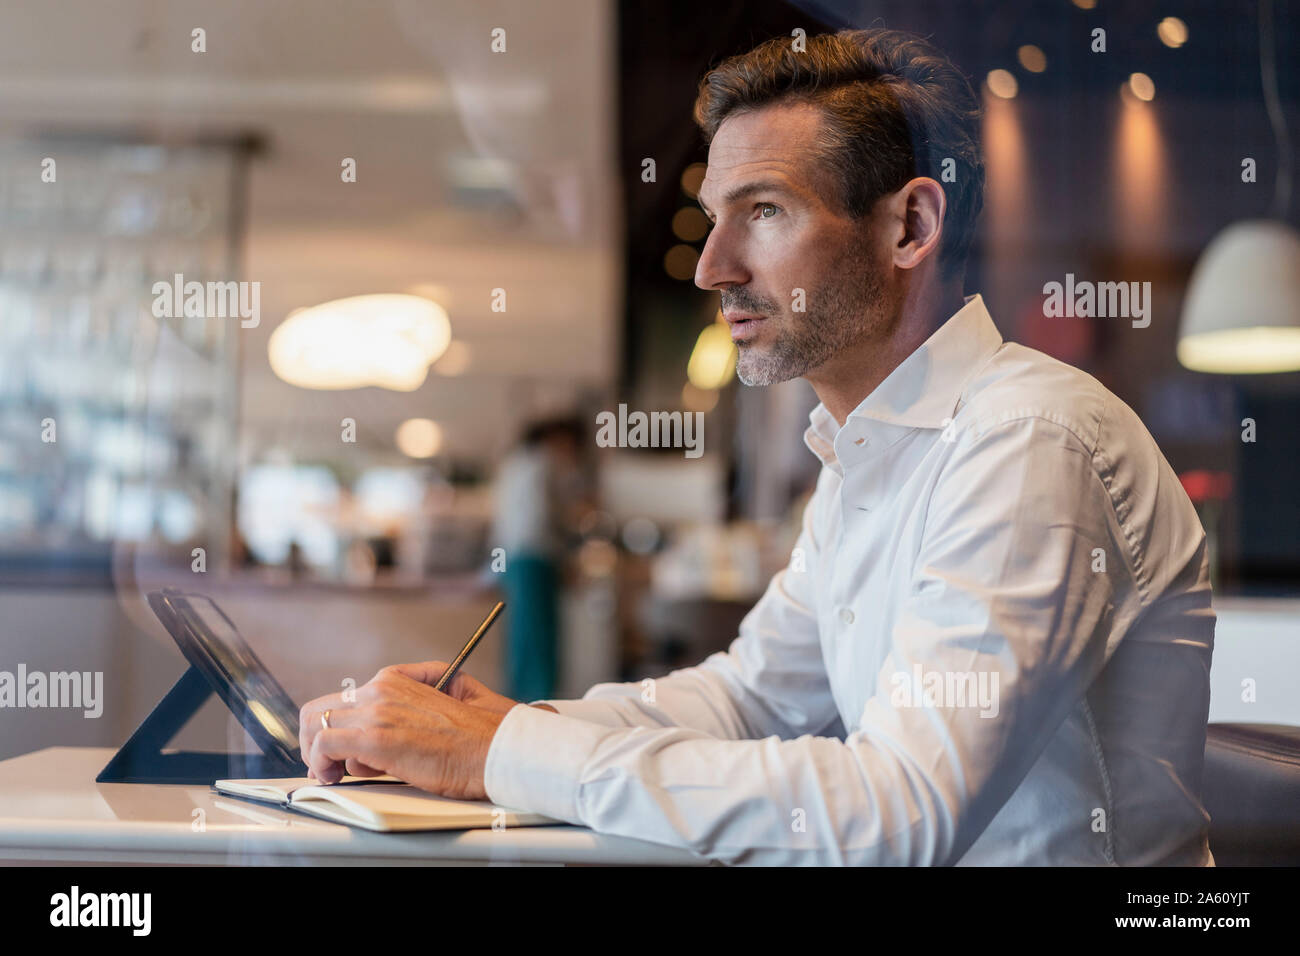 Businessman with tablet in a cafe taking notes Stock Photo